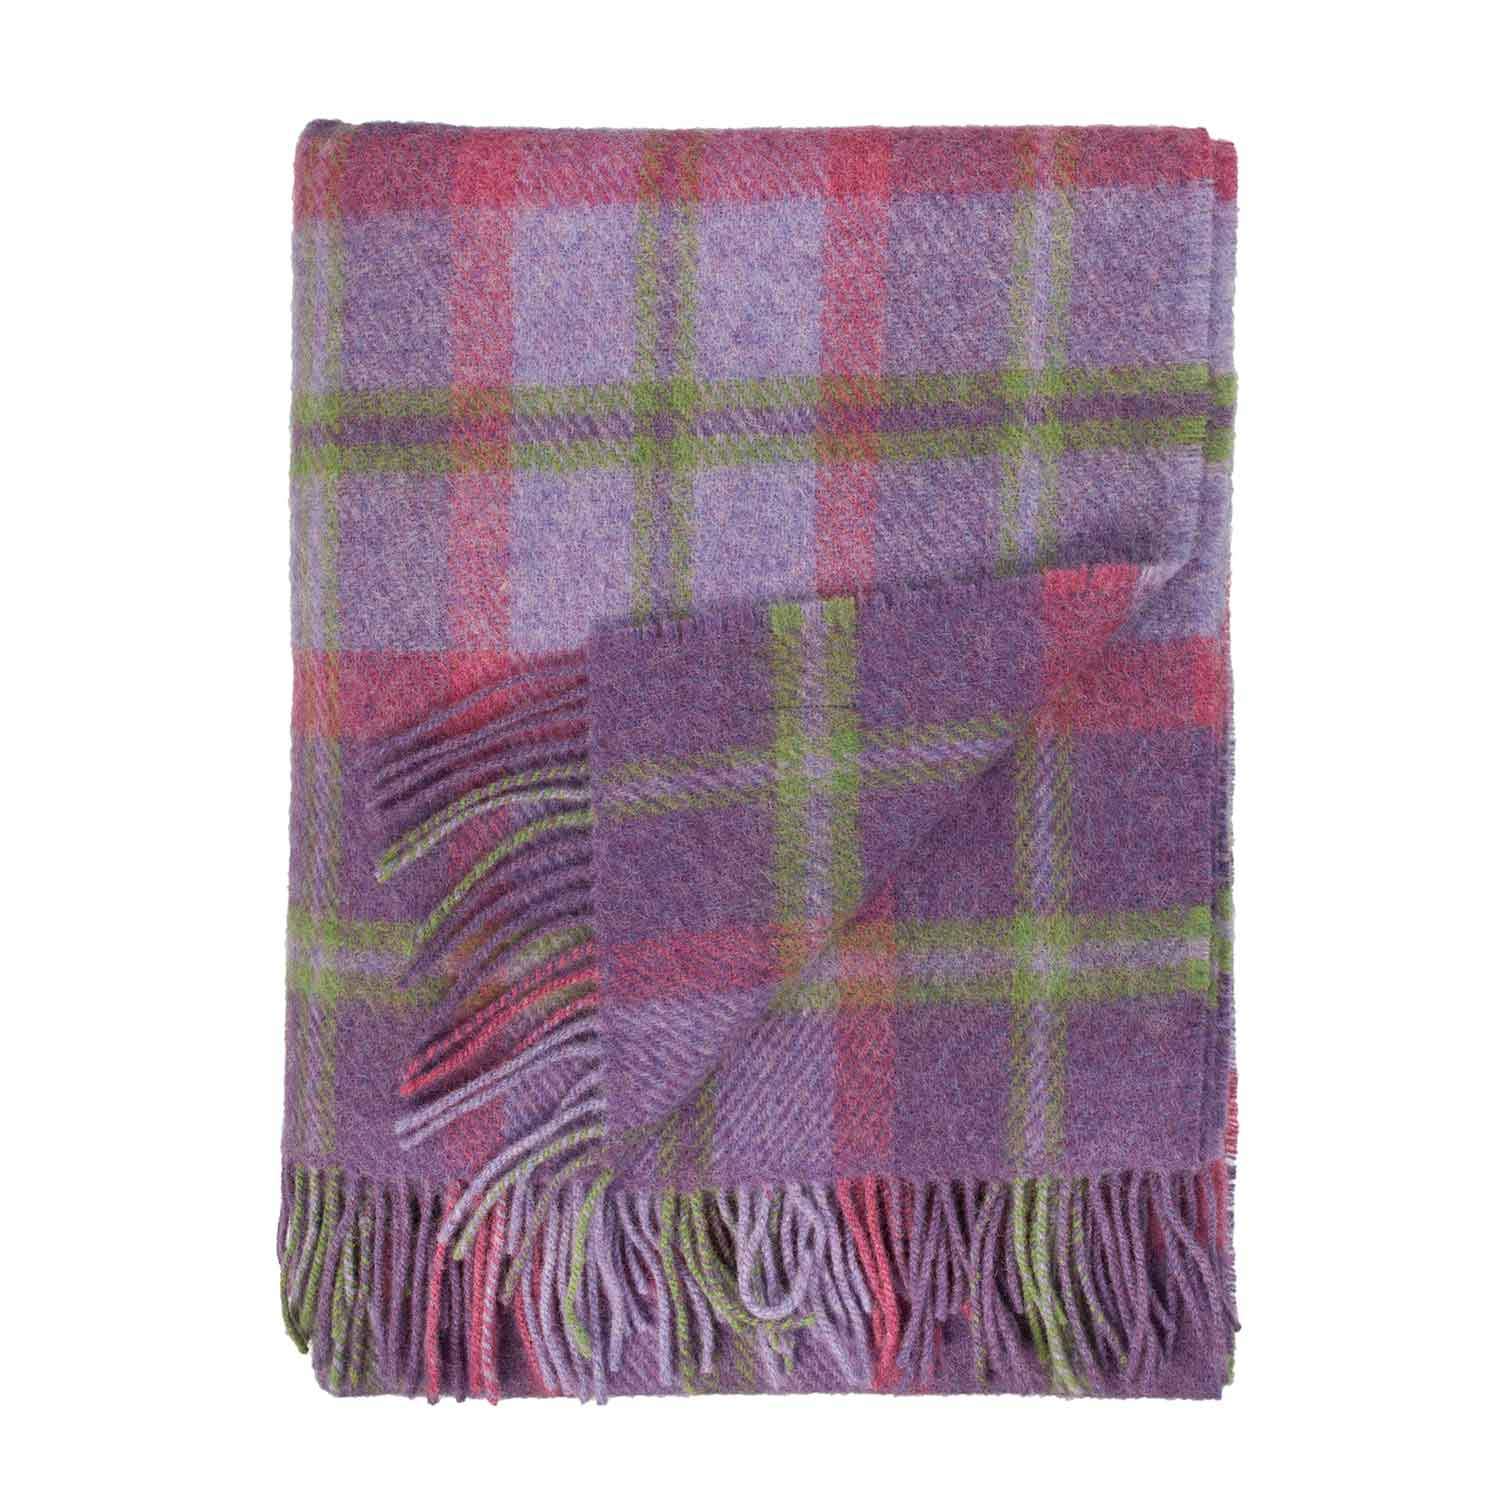 Woollen Throw | Purple Check | English Country | The Wool Company